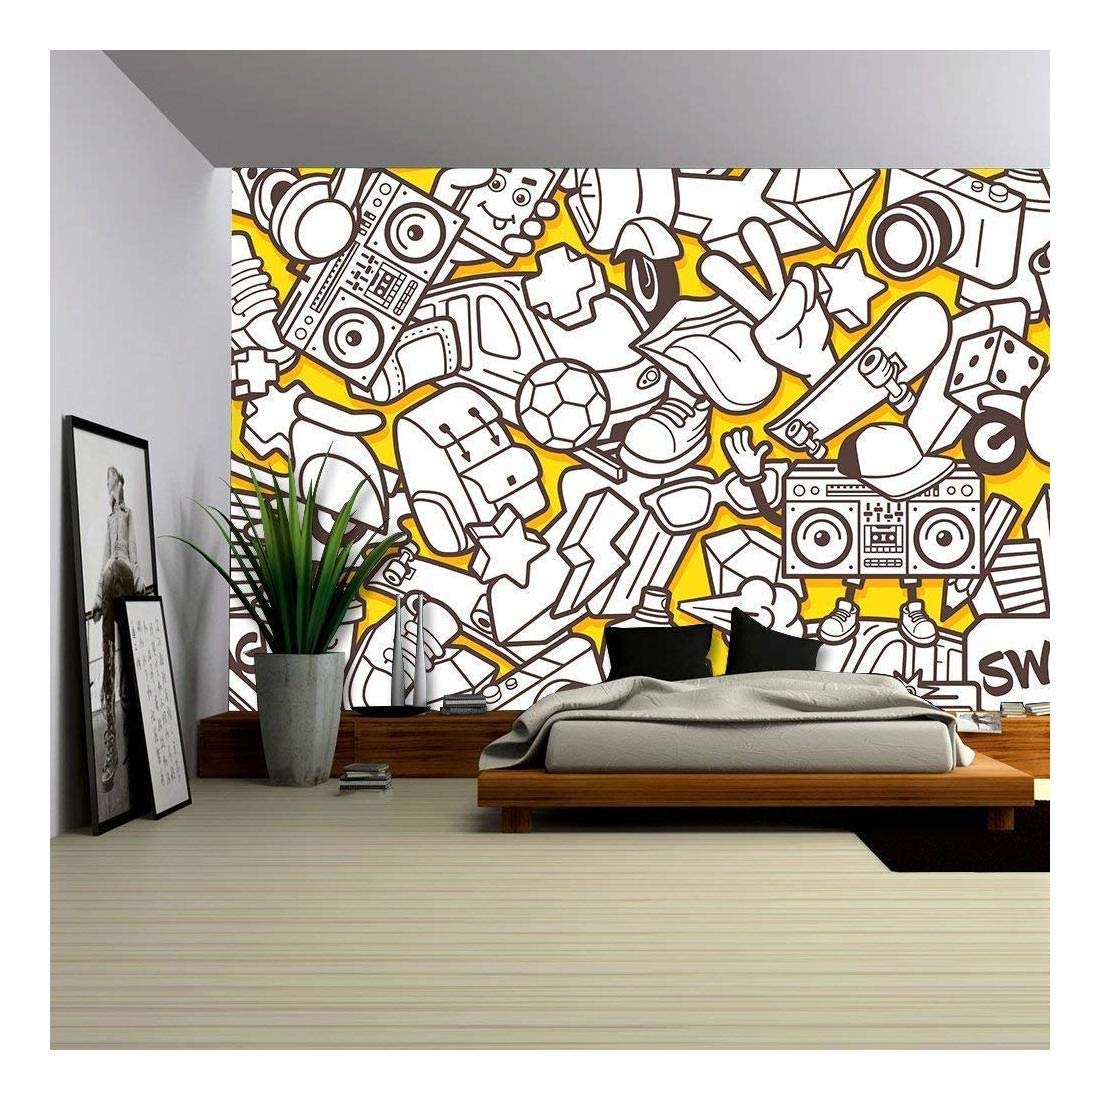 white and yellow graffiti in the home